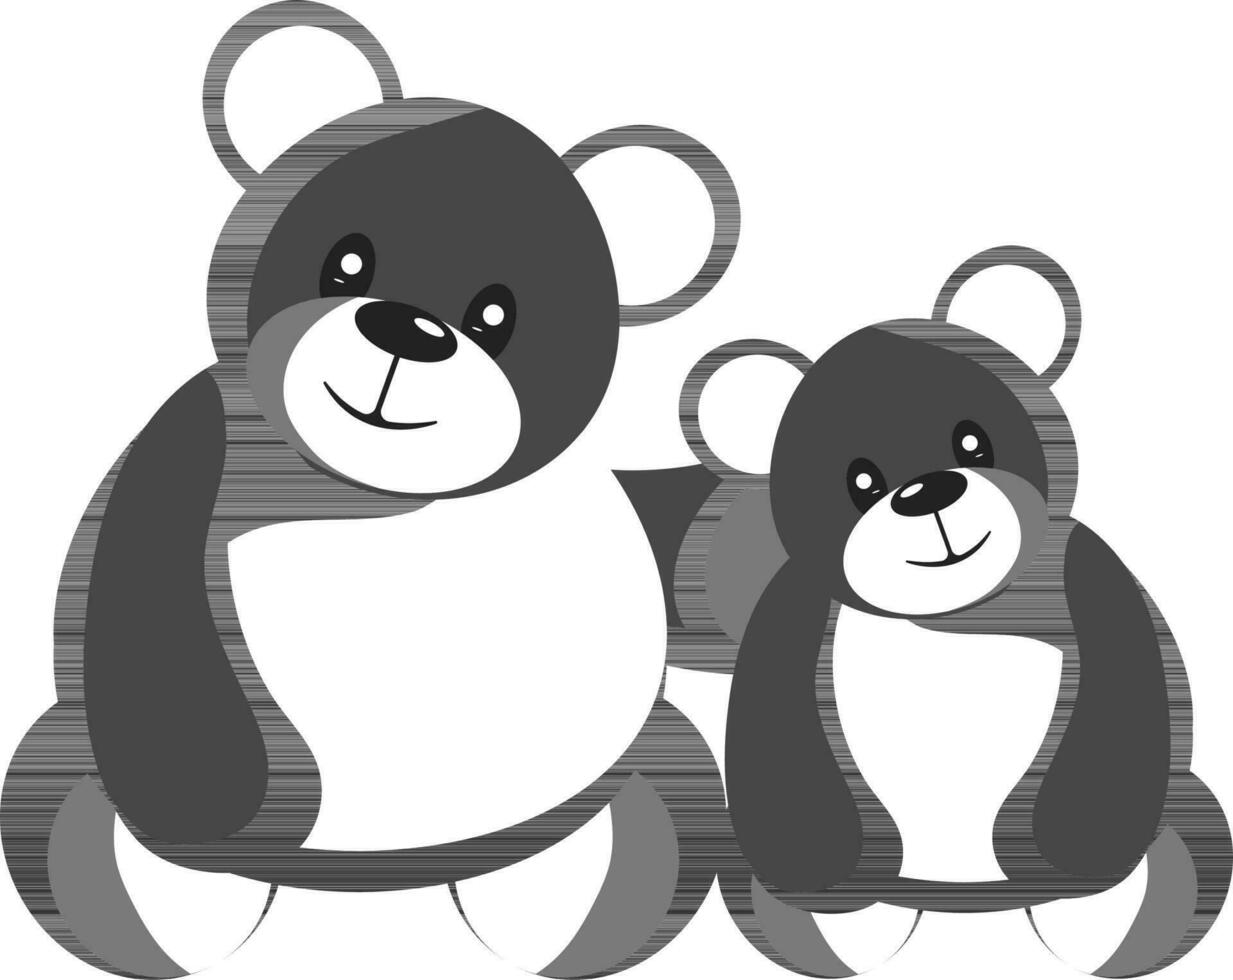 Illustration Of Two Teddy Bear Icon In Gray And White Color. vector